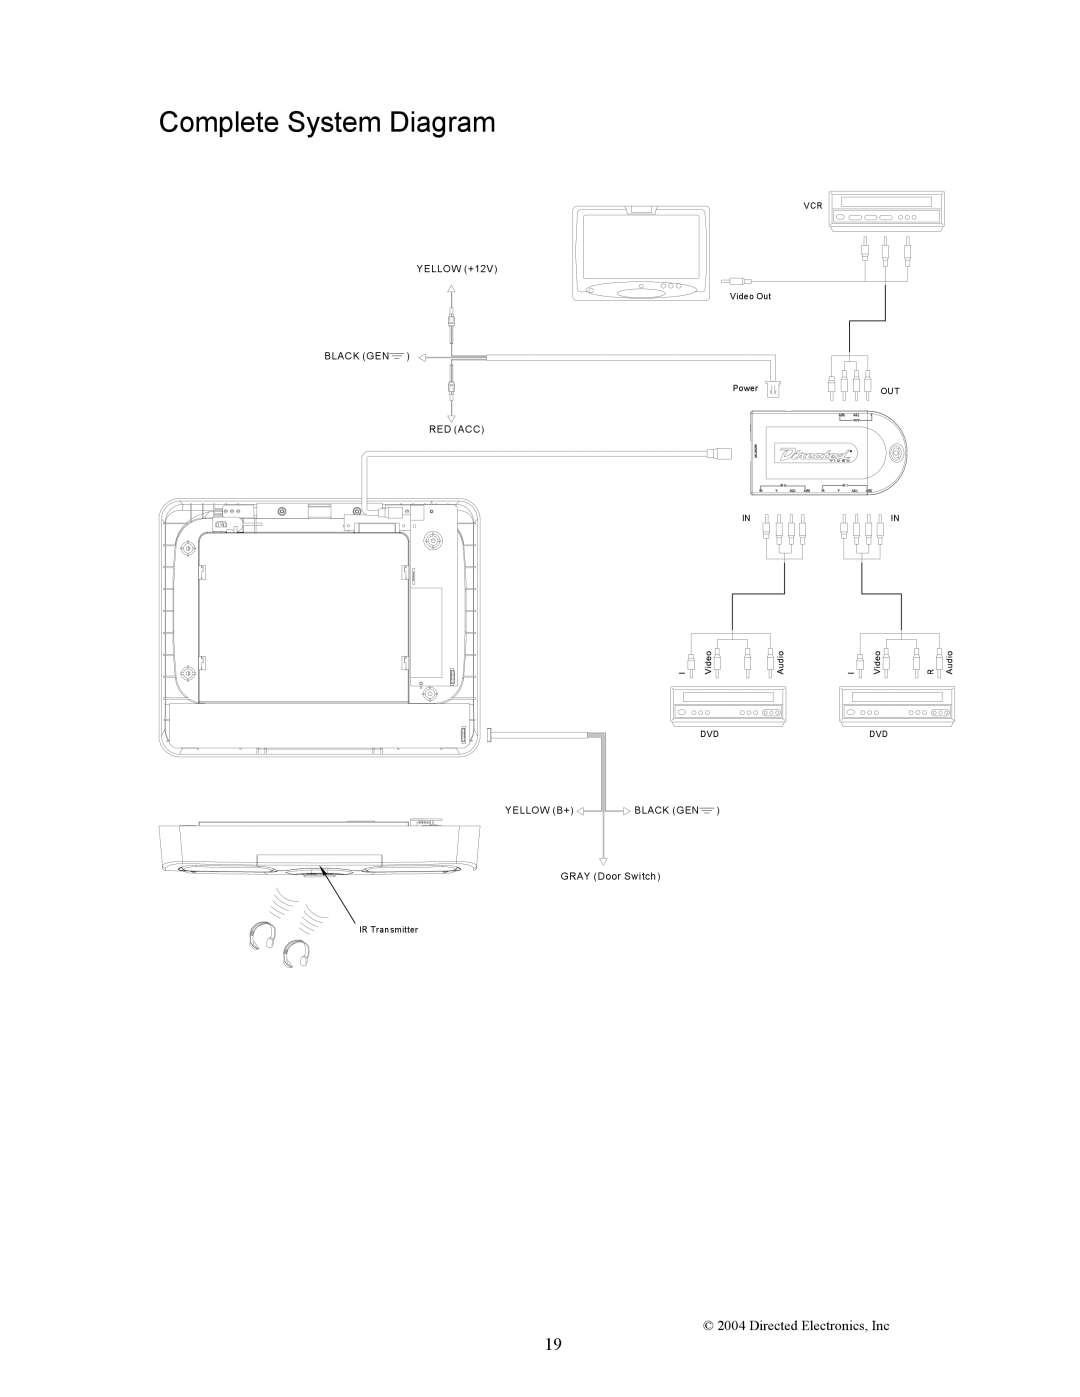 Directed Electronics OHD1502 manual Complete System Diagram 